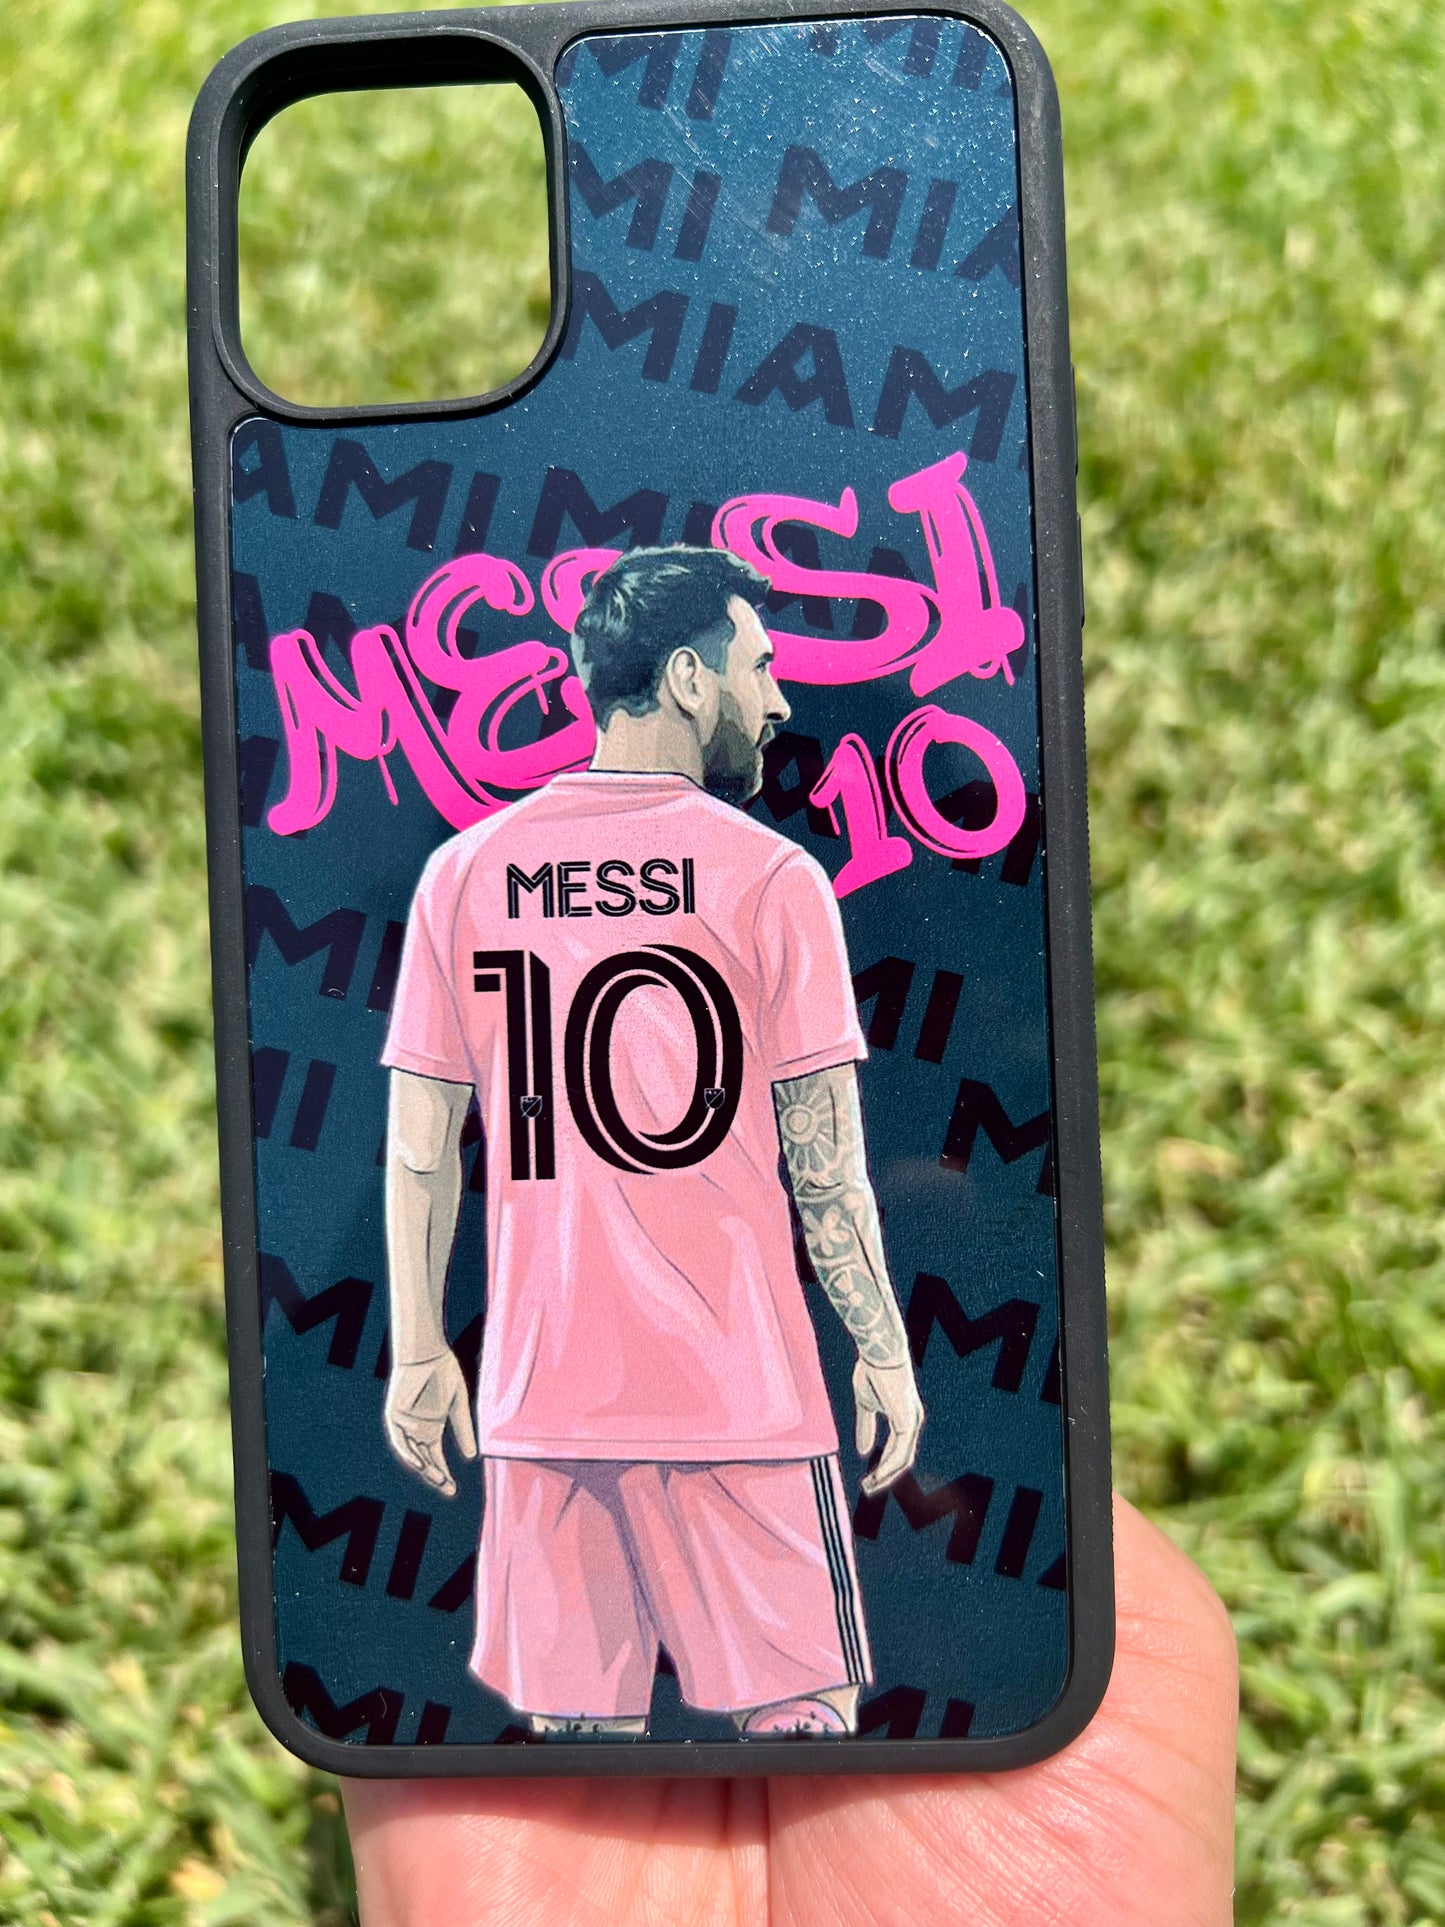 ME SSI NEON PINK PHONE CASE